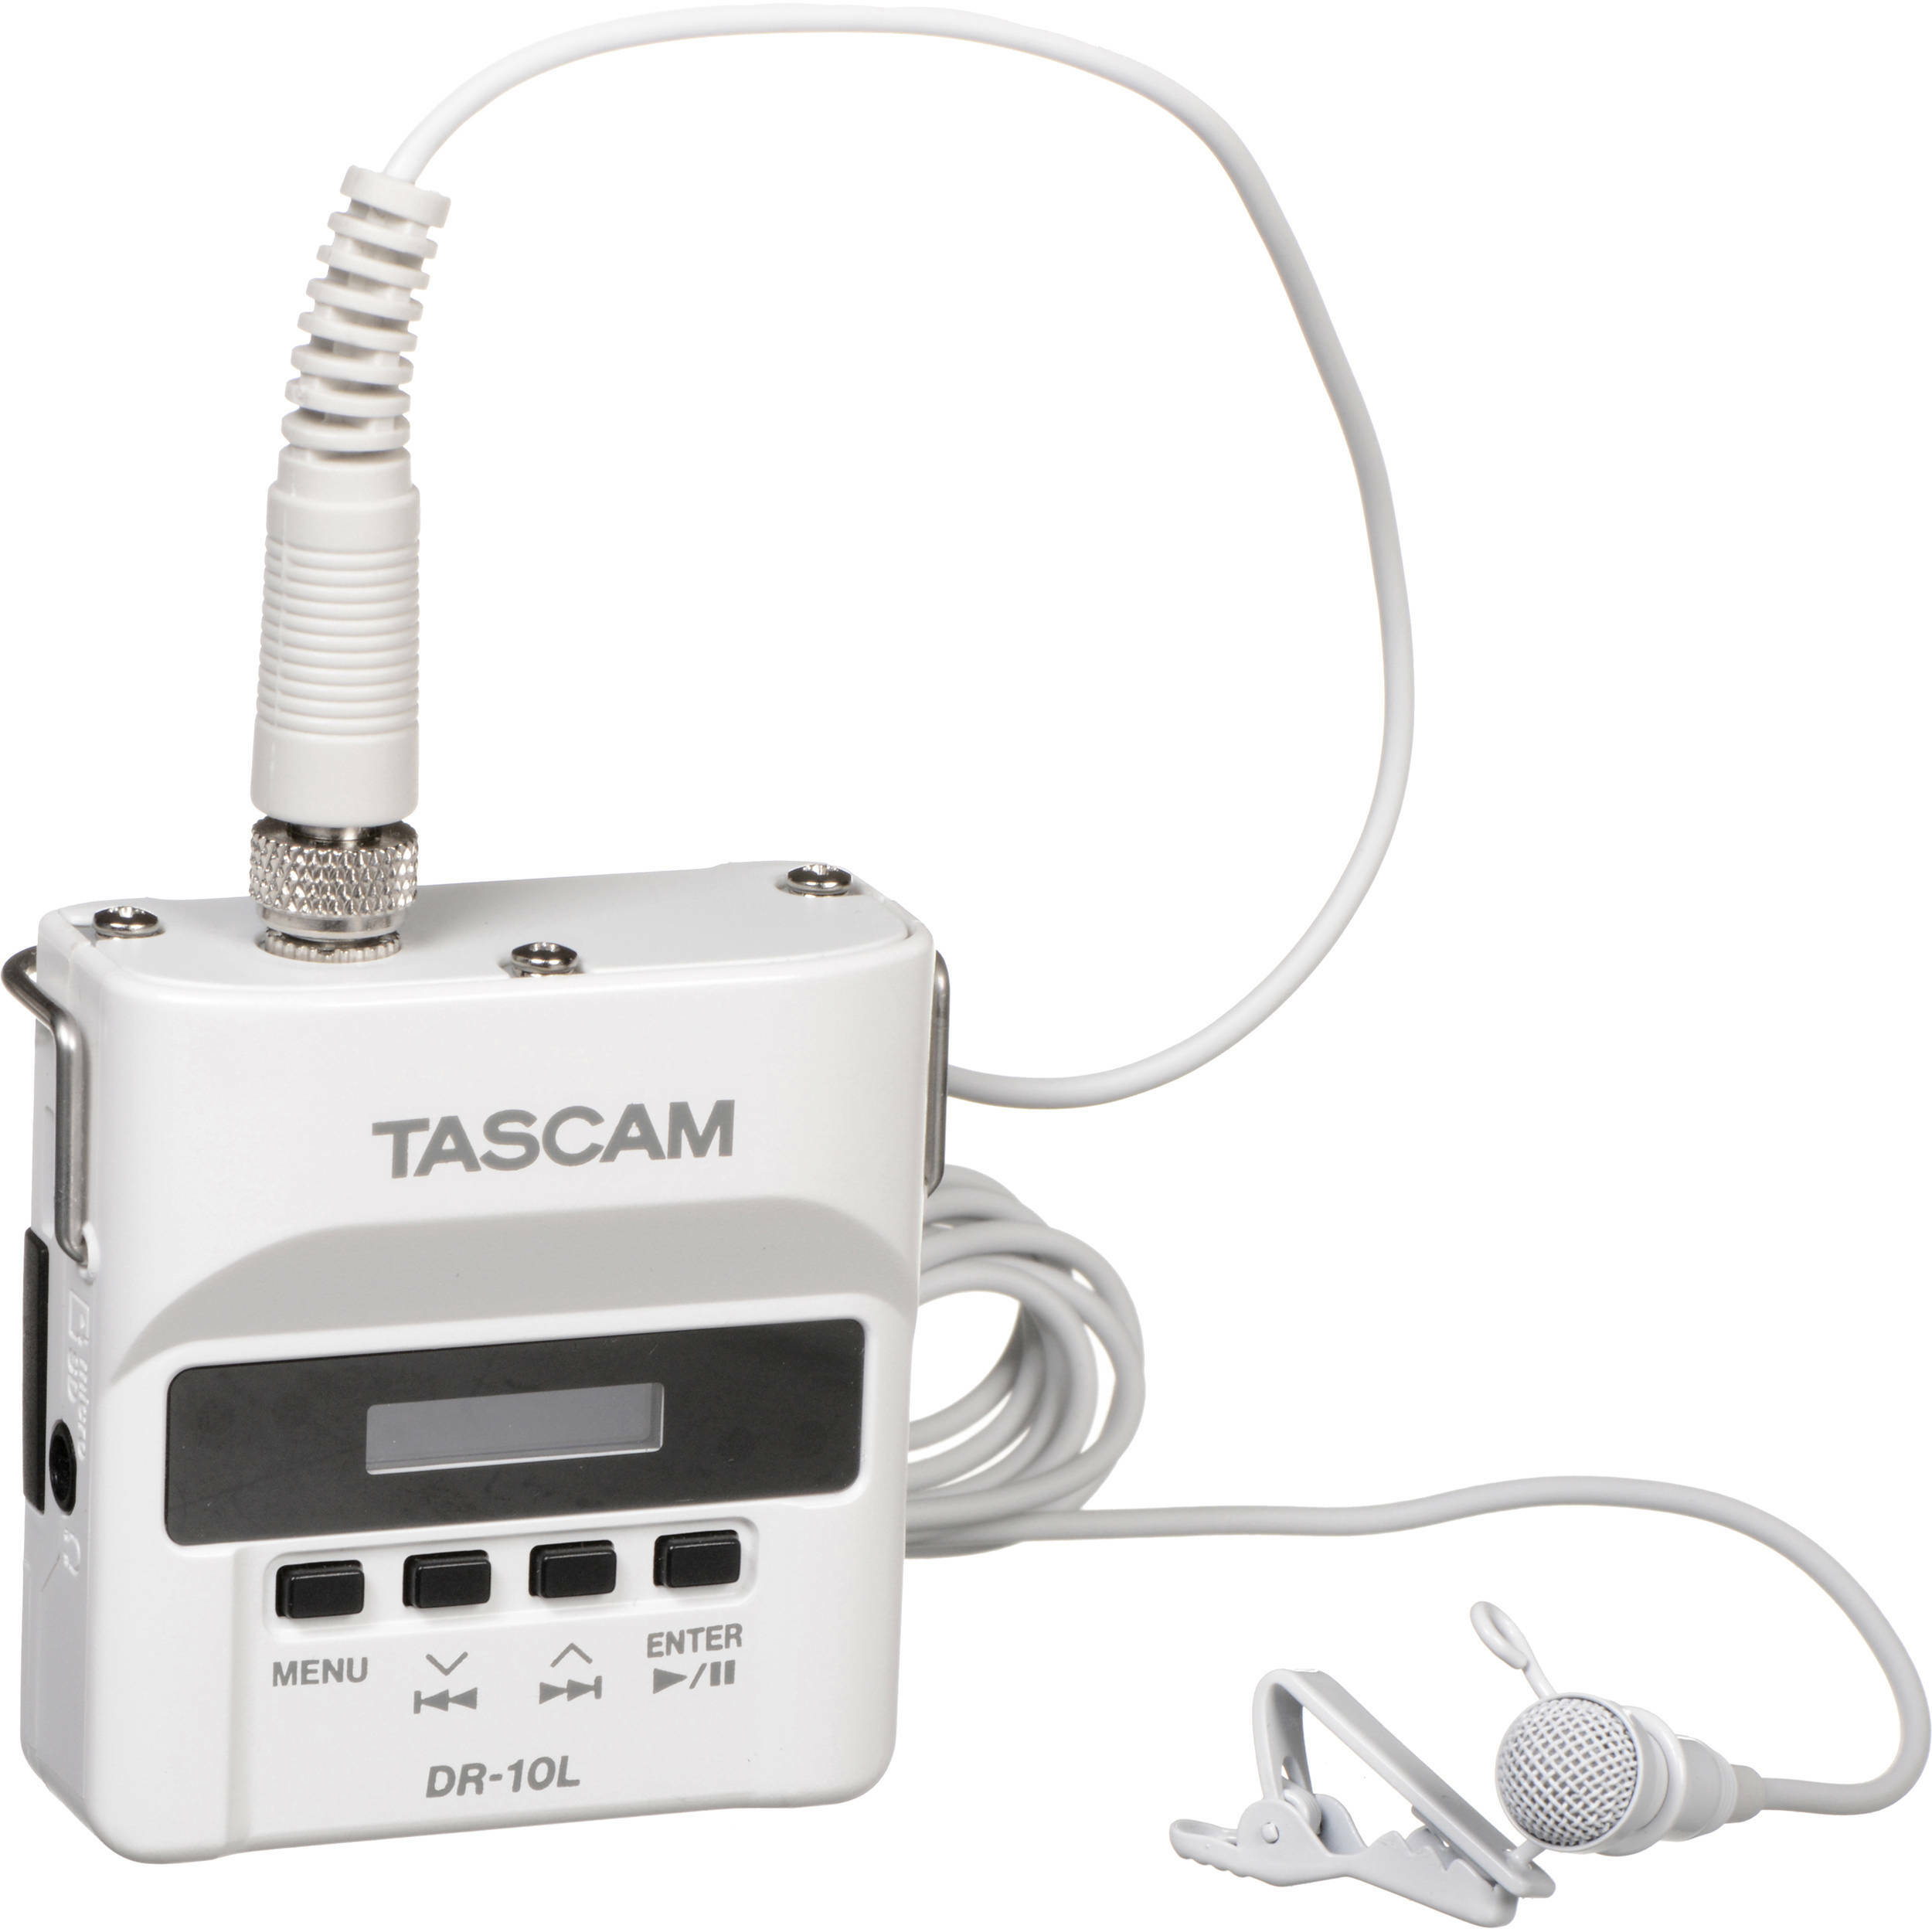 Tascam Dr-10lw - Portable recorder - Main picture